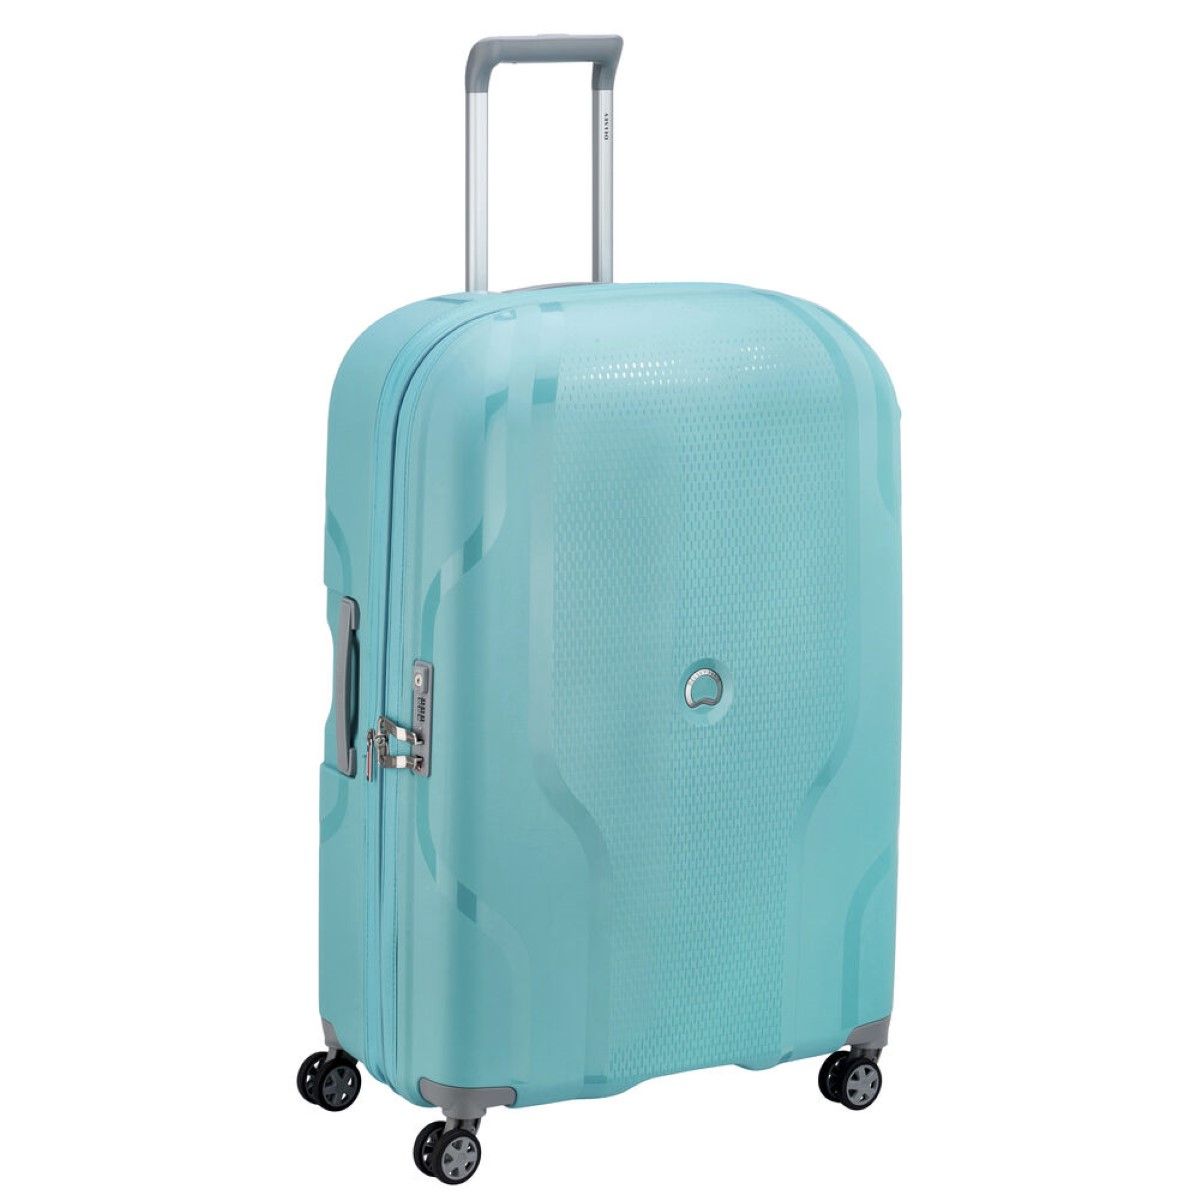 Expandable Large Trolley Clavel 76 cm Delsey, hardcase four wheeled trolley with a vintage design, with zipped compartment, TSA combination lock, side handle, and telescopic double tube handle.